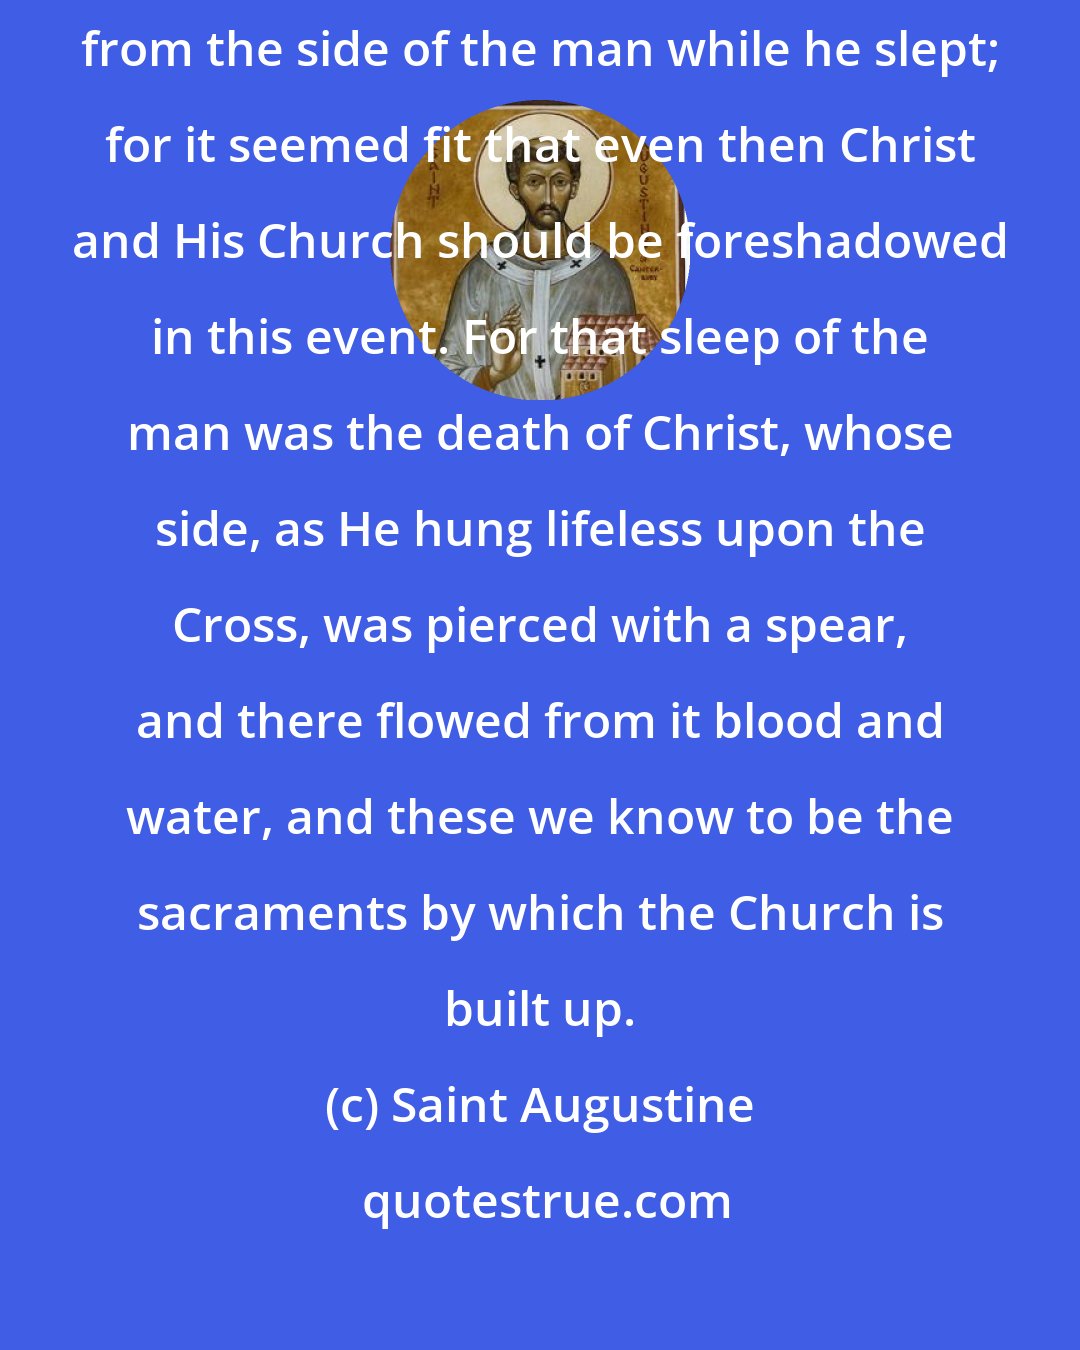 Saint Augustine: ... at the beginning of the human race the woman was made of a rib taken from the side of the man while he slept; for it seemed fit that even then Christ and His Church should be foreshadowed in this event. For that sleep of the man was the death of Christ, whose side, as He hung lifeless upon the Cross, was pierced with a spear, and there flowed from it blood and water, and these we know to be the sacraments by which the Church is built up.